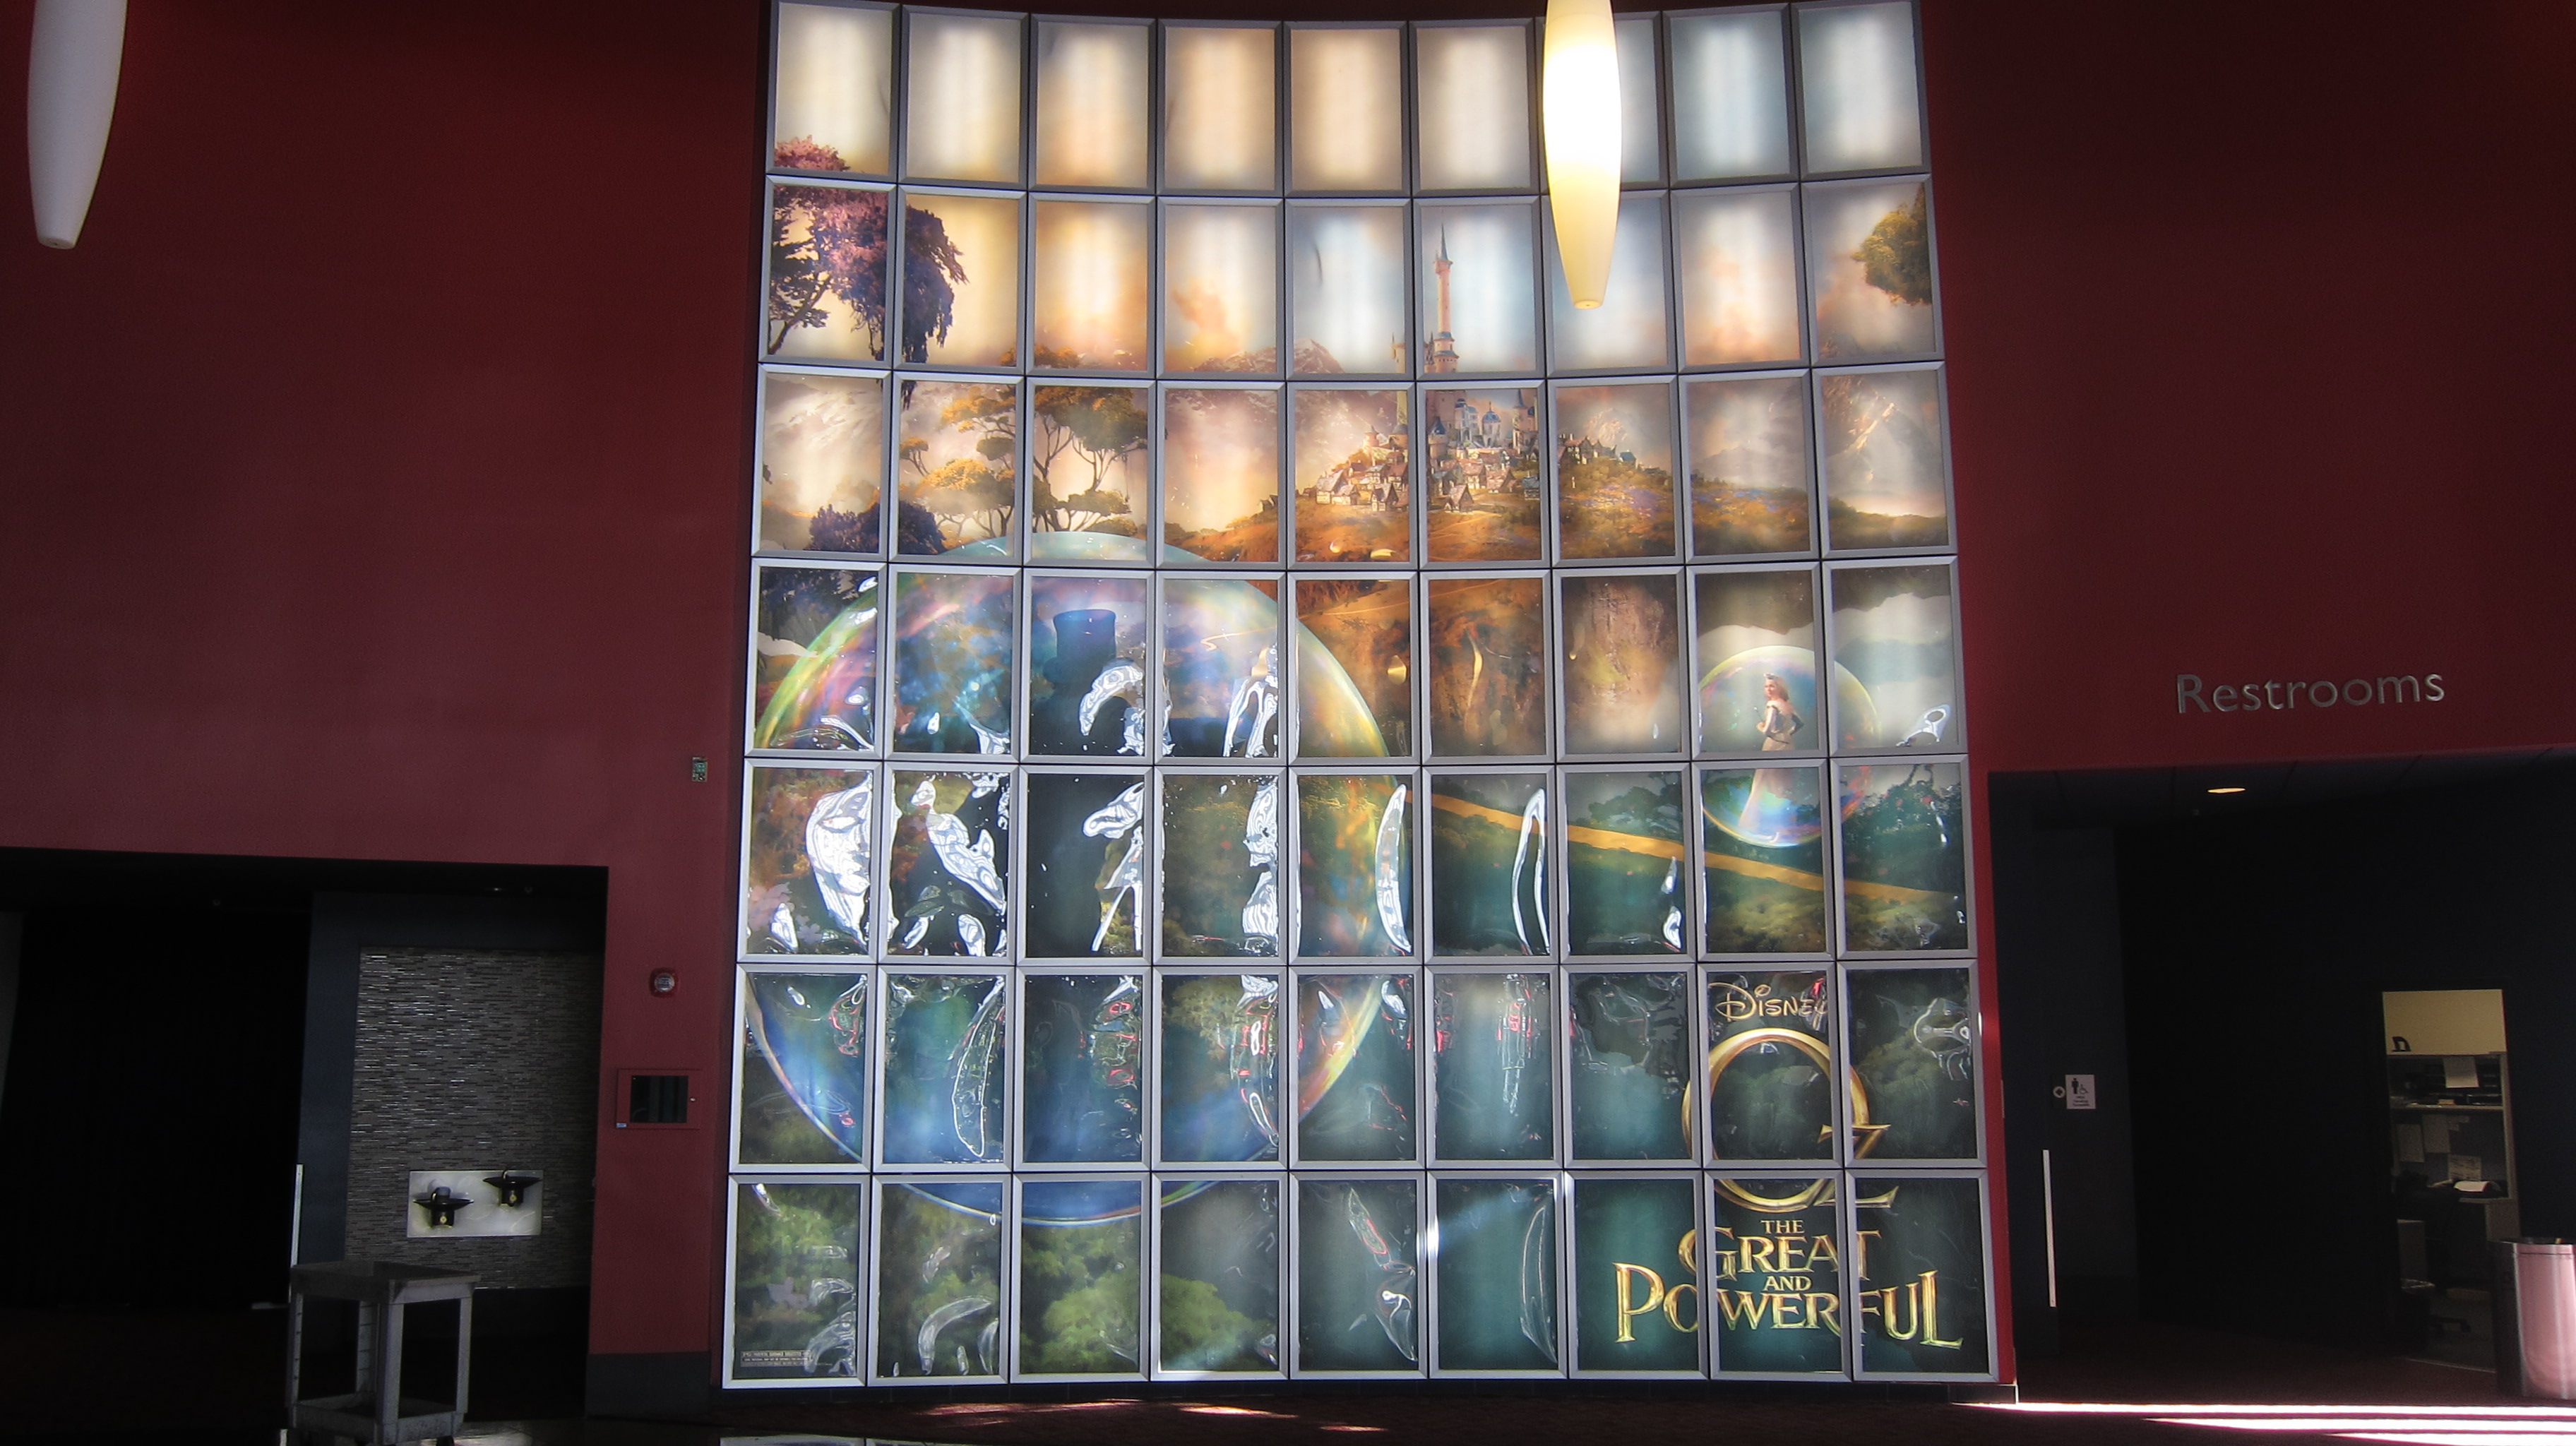 Giant backlit wall for Disney's OZ THE GREAT AND POWERFUL at the ArcLight Beach Cities.